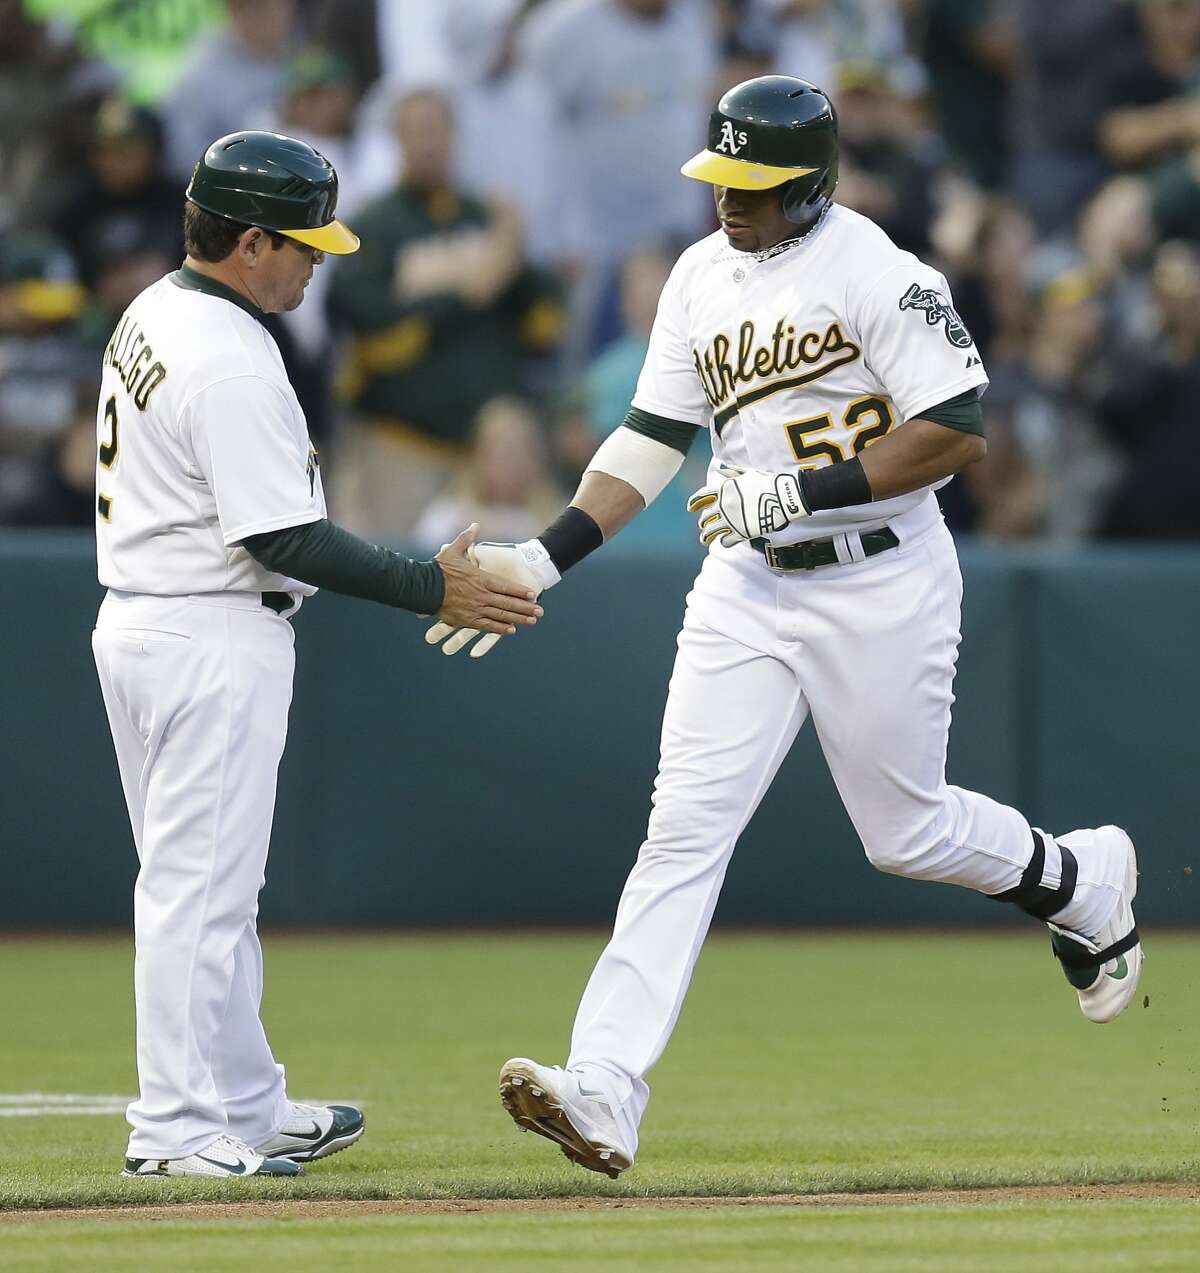 Oakland Athletics' Yoenis Cespedes, right, is congratulated by third base coach Mike Gallego after hitting a home run off Boston Red Sox pitcher Jake Peavy in the third inning of a baseball game Thursday, June 19, 2014, in Oakland, Calif. (AP Photo/Ben Margot)